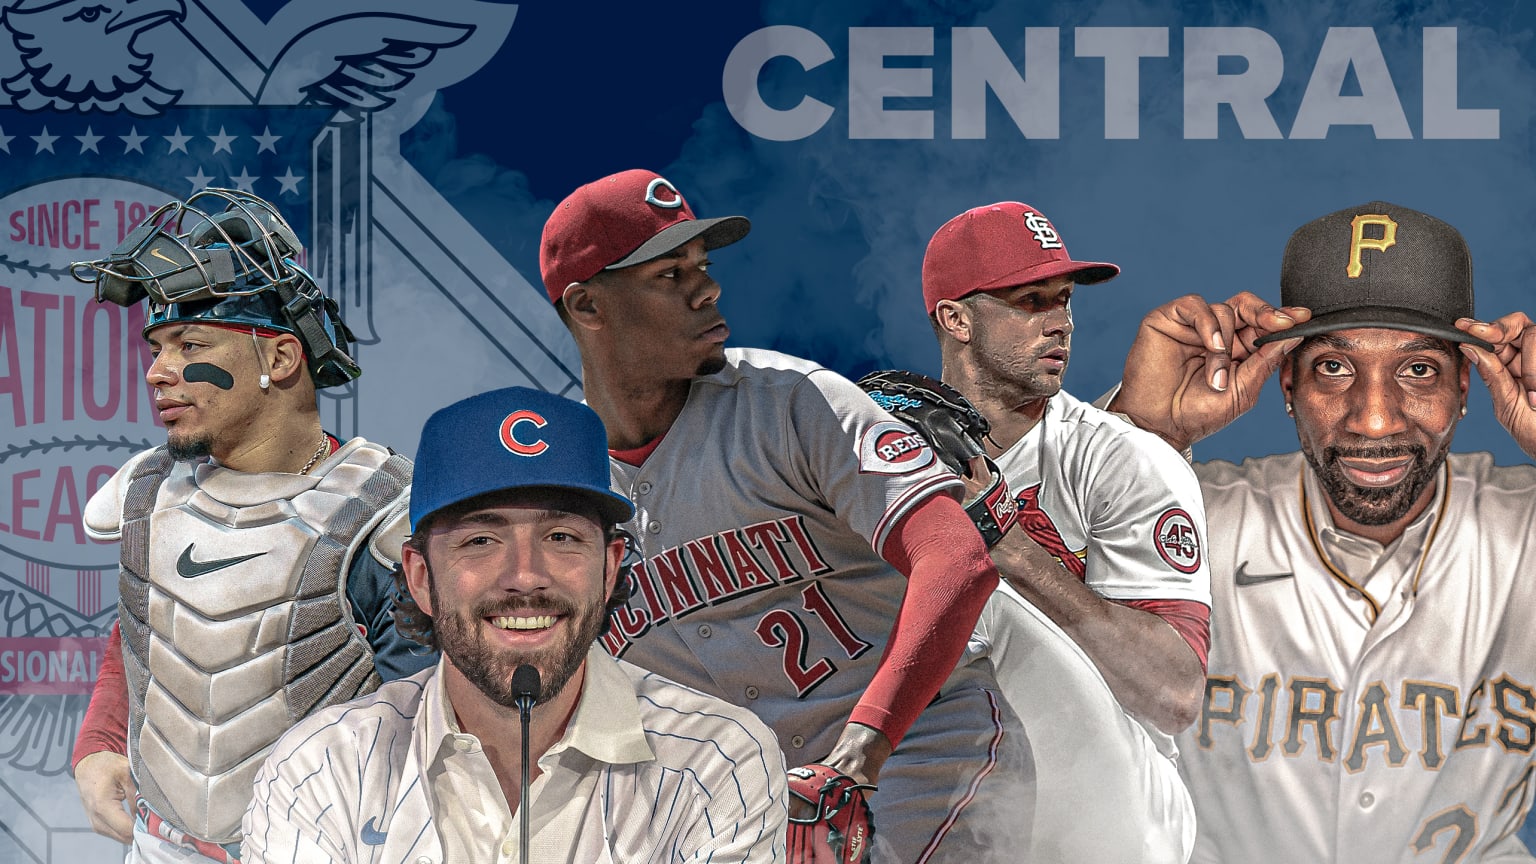 A designed image showing five players against a blue background showing the National League logo and the word ''CENTRAL''